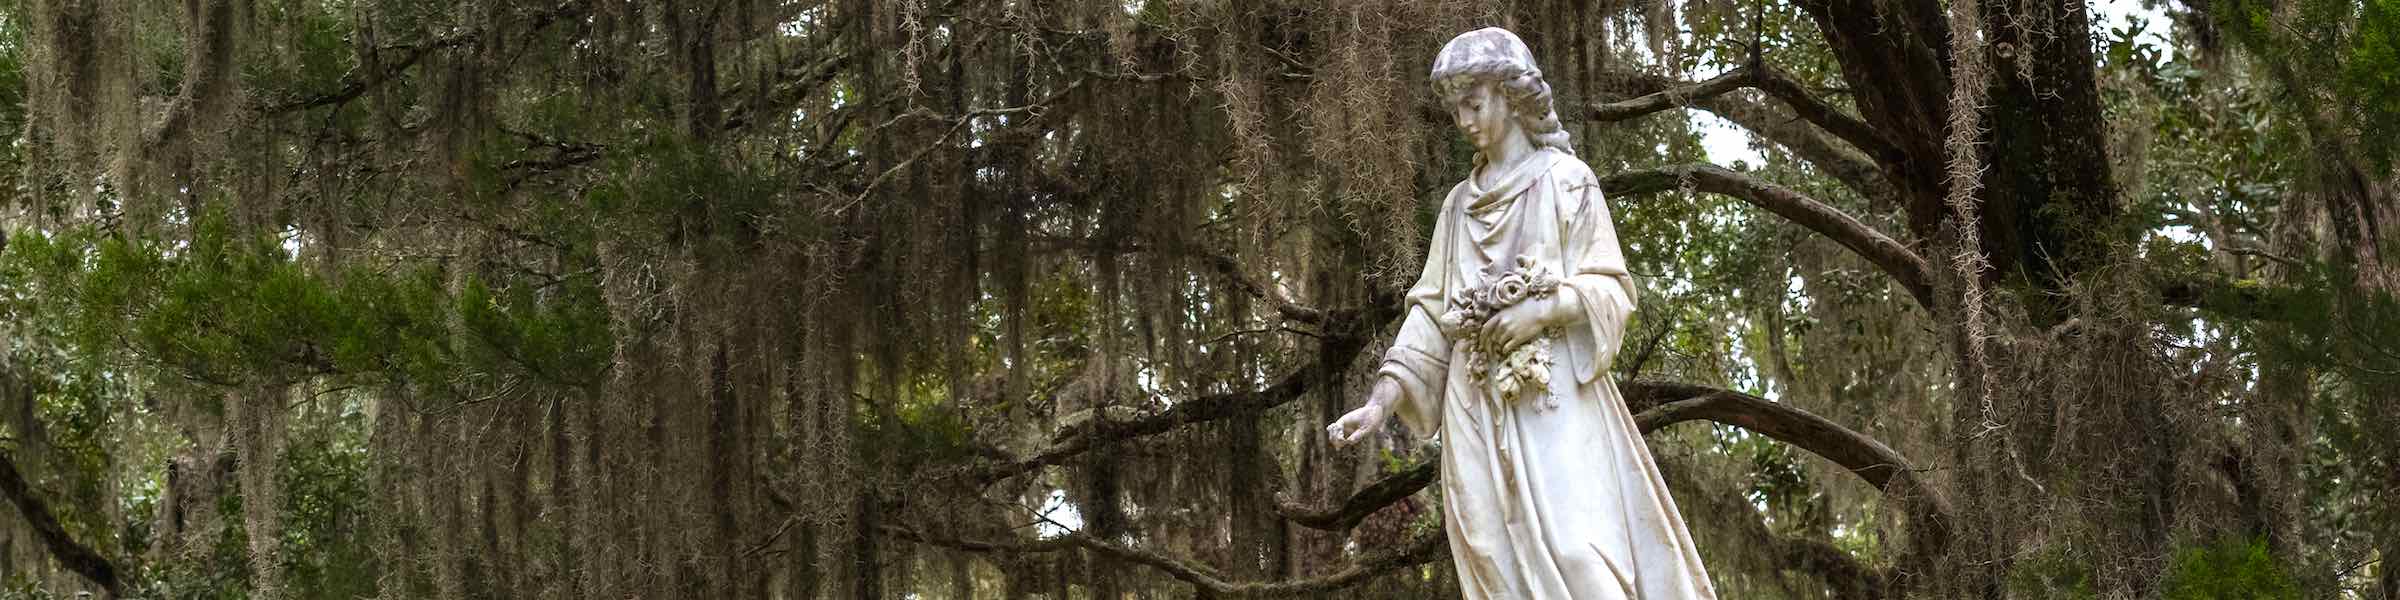 Statue depicting a standing woman in a historic Savannah, GA cemetery.